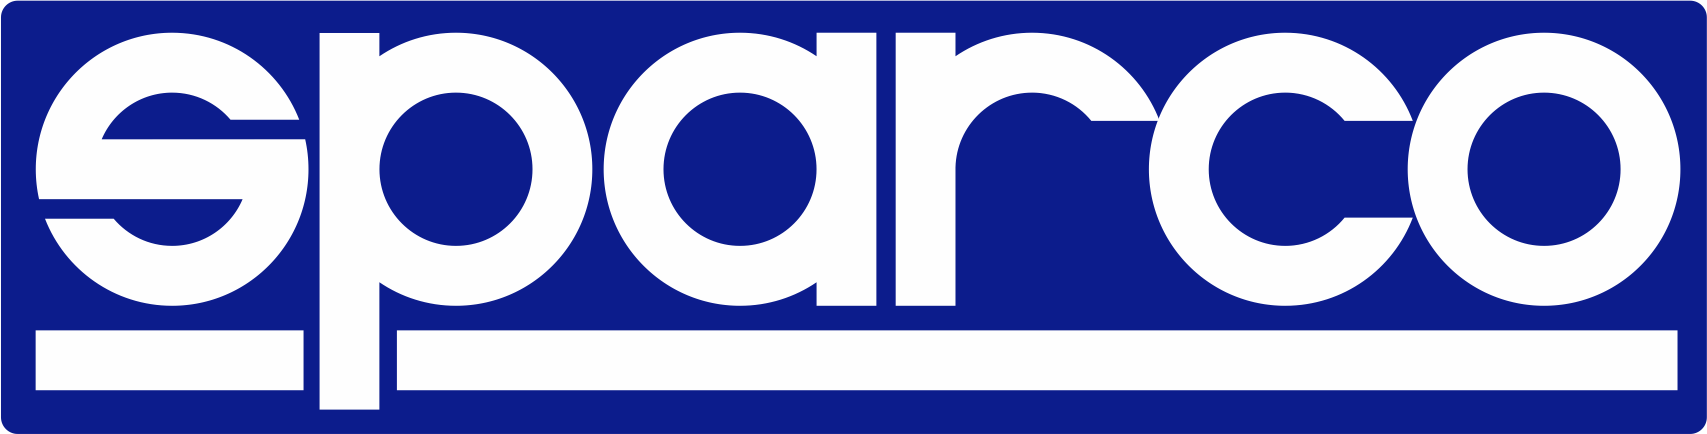 Sparco logo for download in vector format